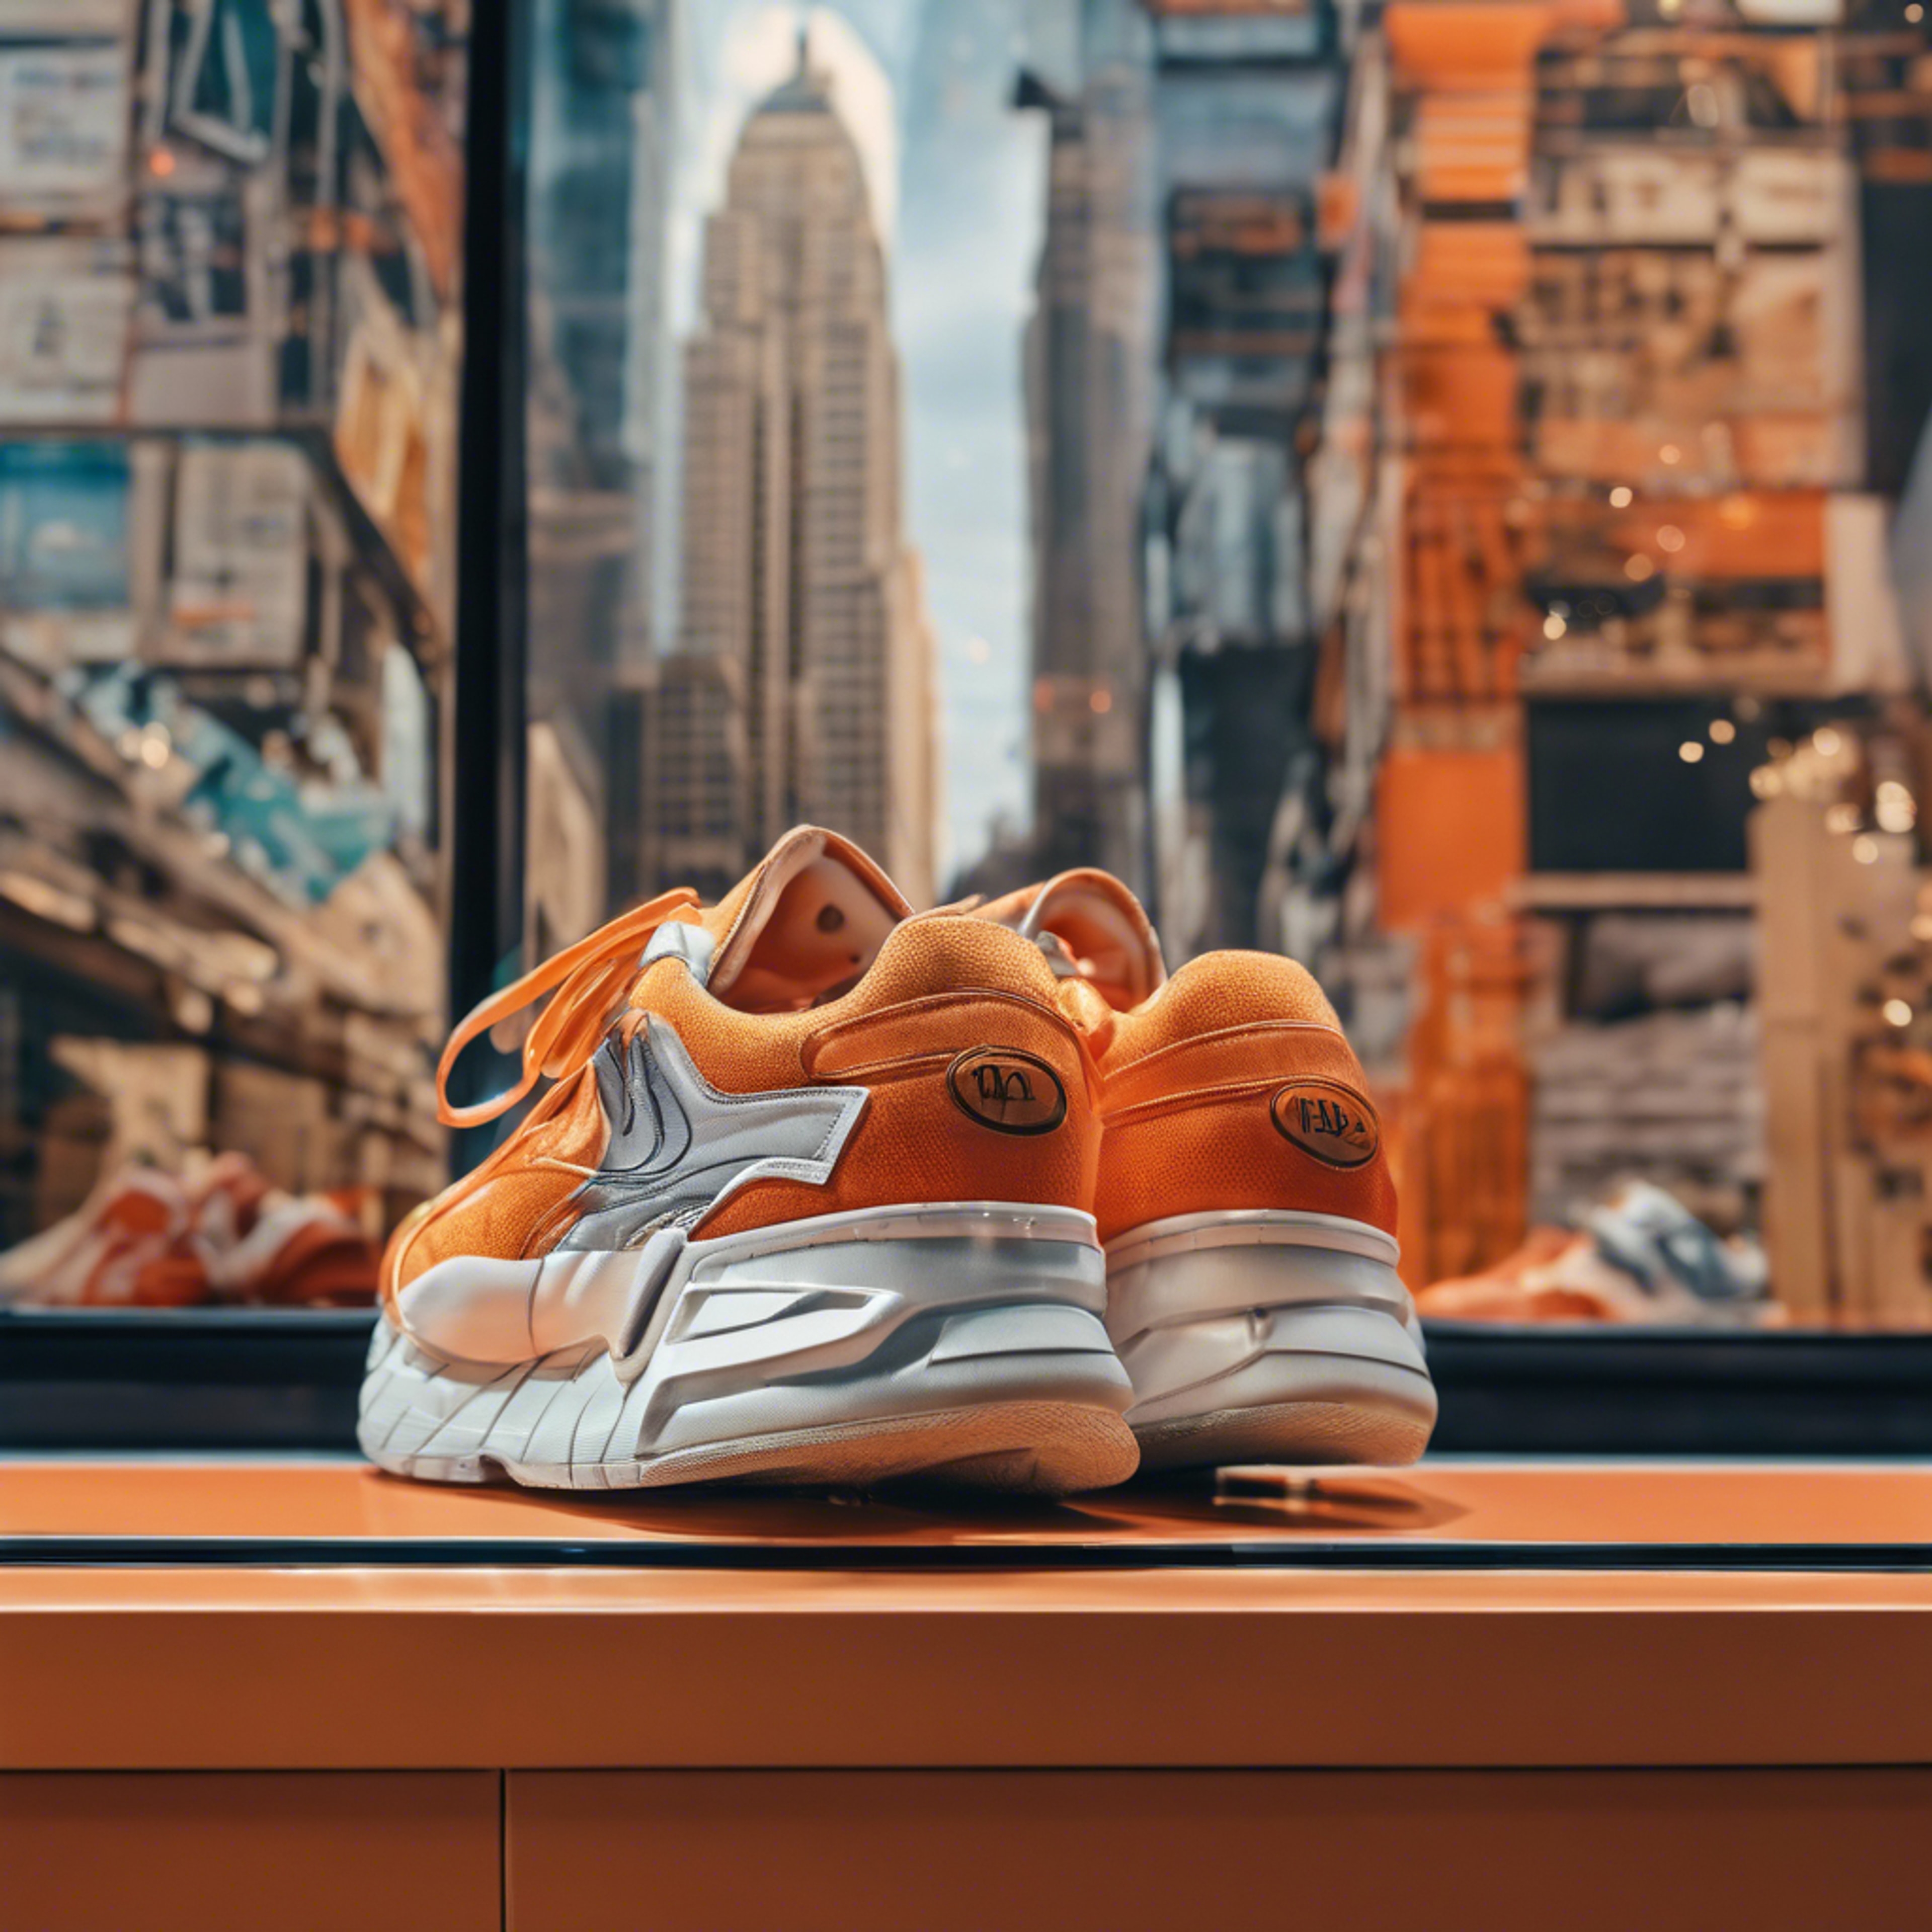 Orange Y2K-inspired sneakers displayed in a shoe store window with a retro cityscape backdrop. Taustakuva[c42ef01953ac4184b365]